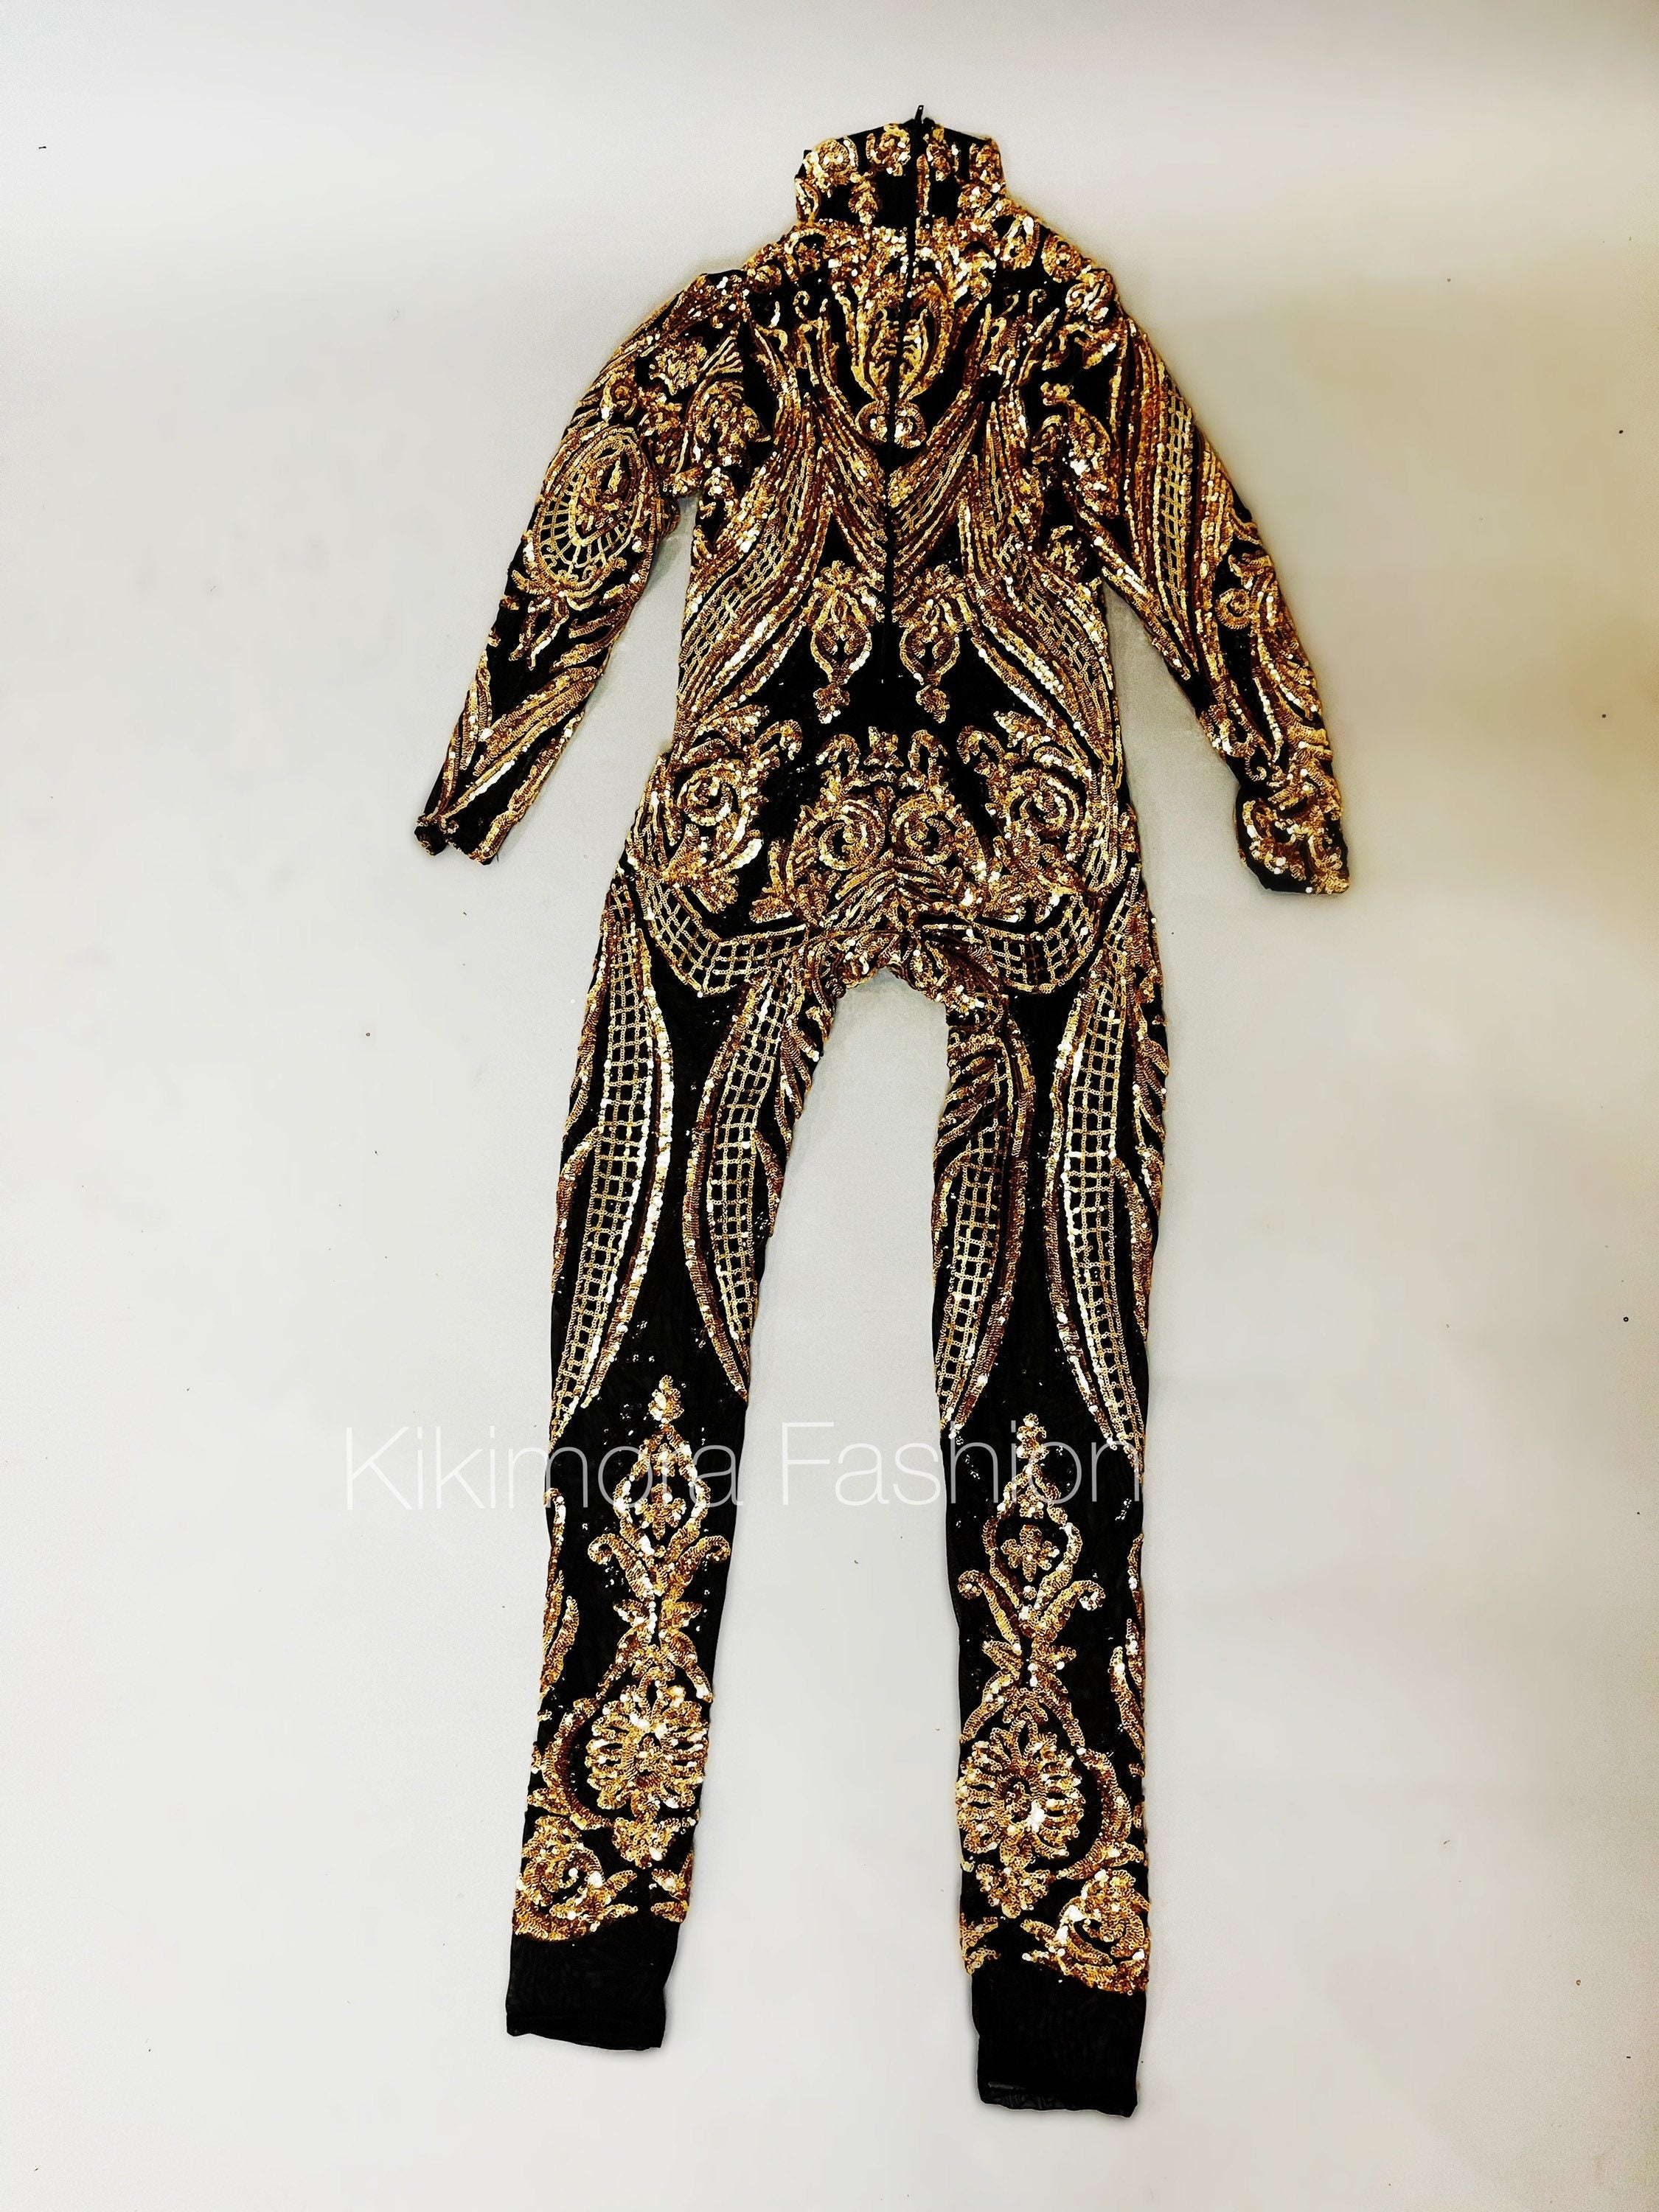 Gold Sequins Catsuit, Contortionist Costume, Elegant Sexy Fashion for Dancers, Circus Performers, Party Outfit, Stage Clothing